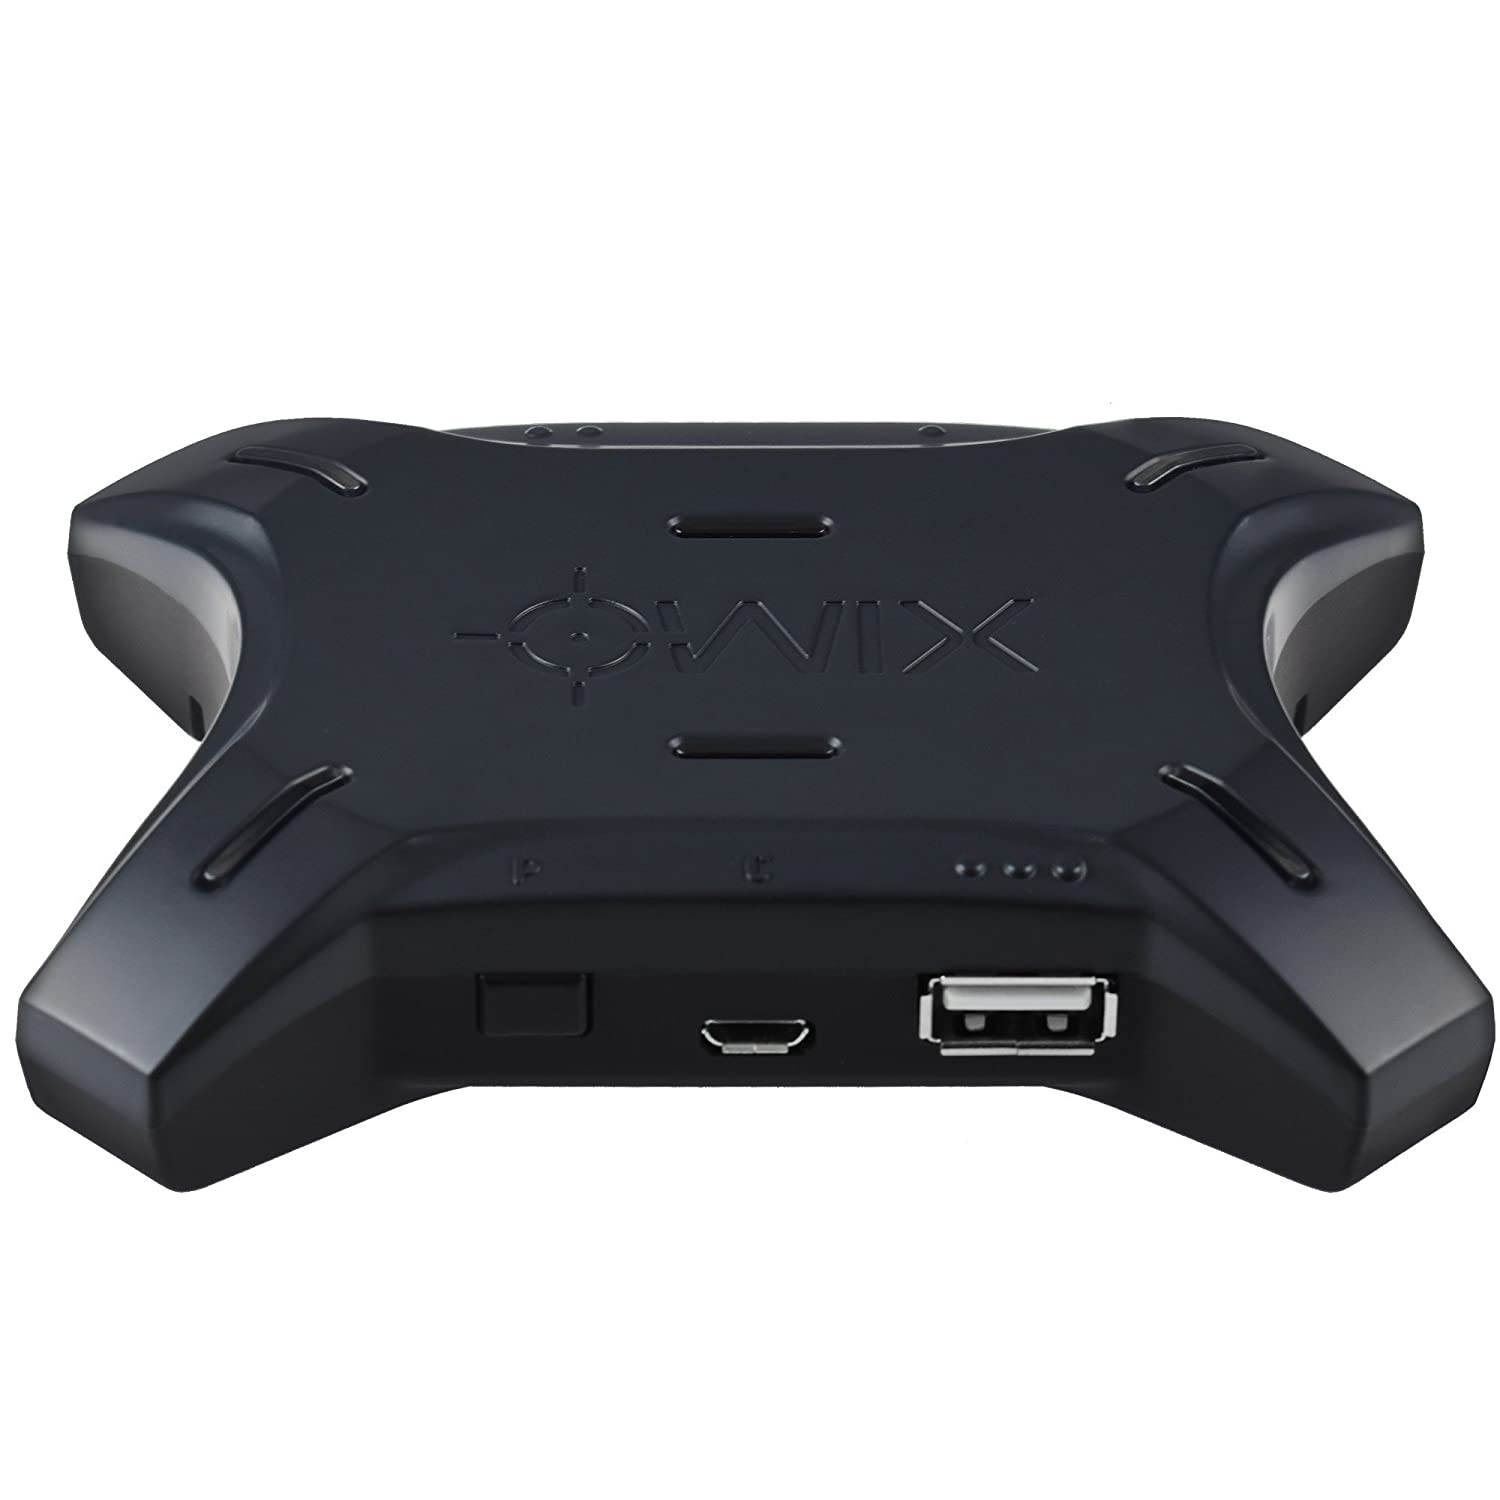 Xim 4 Keyboard and Mouse Adapter